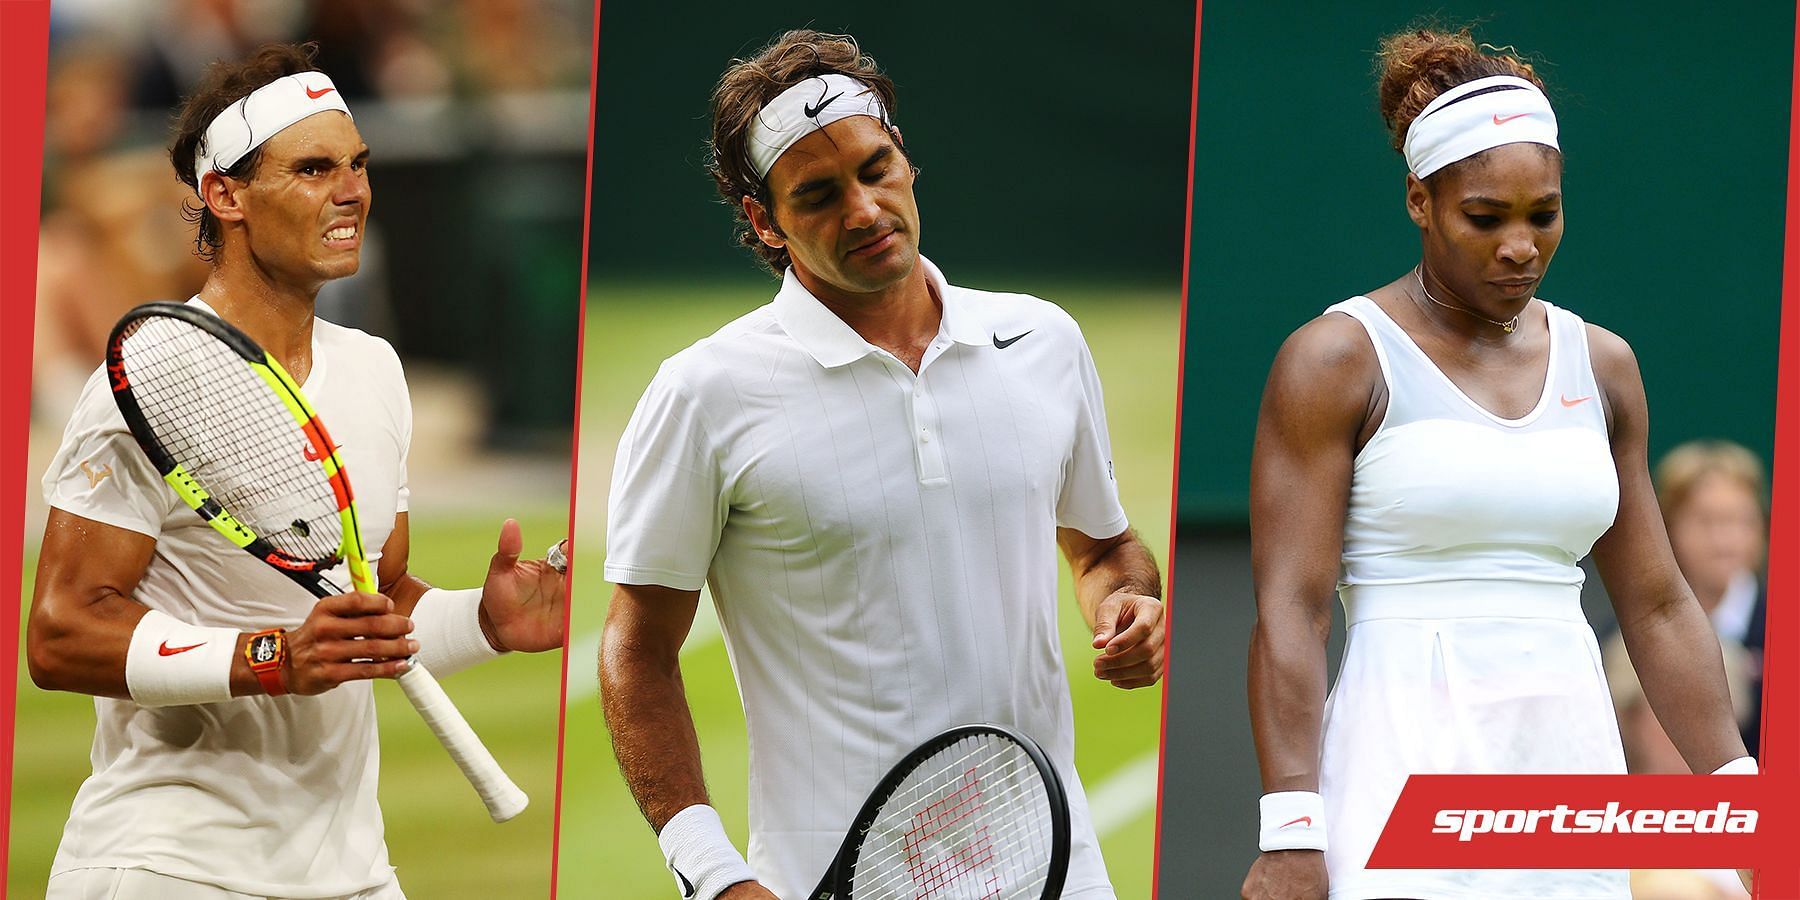 Roger Federer, Rafael Nadal, and Serena Williams have been victims of some major upsets at Wimbledon